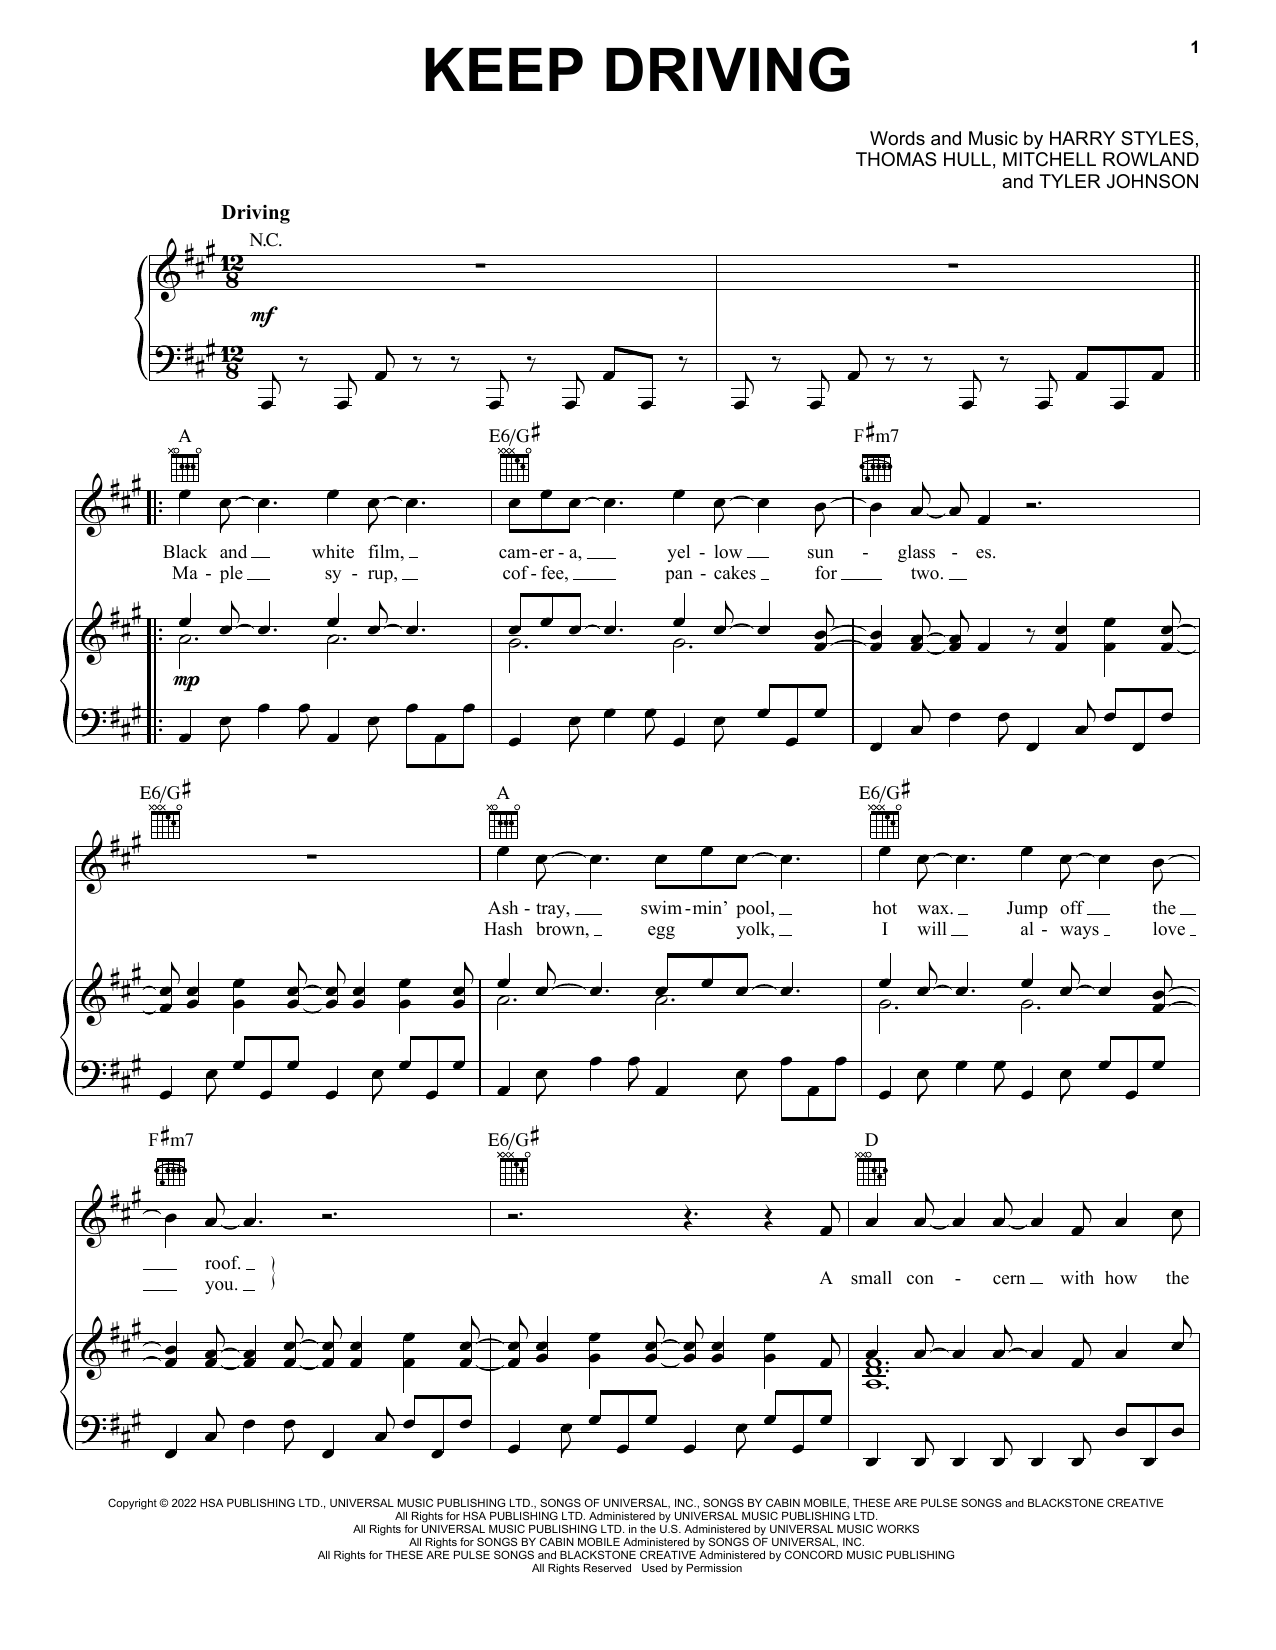 Download Harry Styles Keep Driving Sheet Music